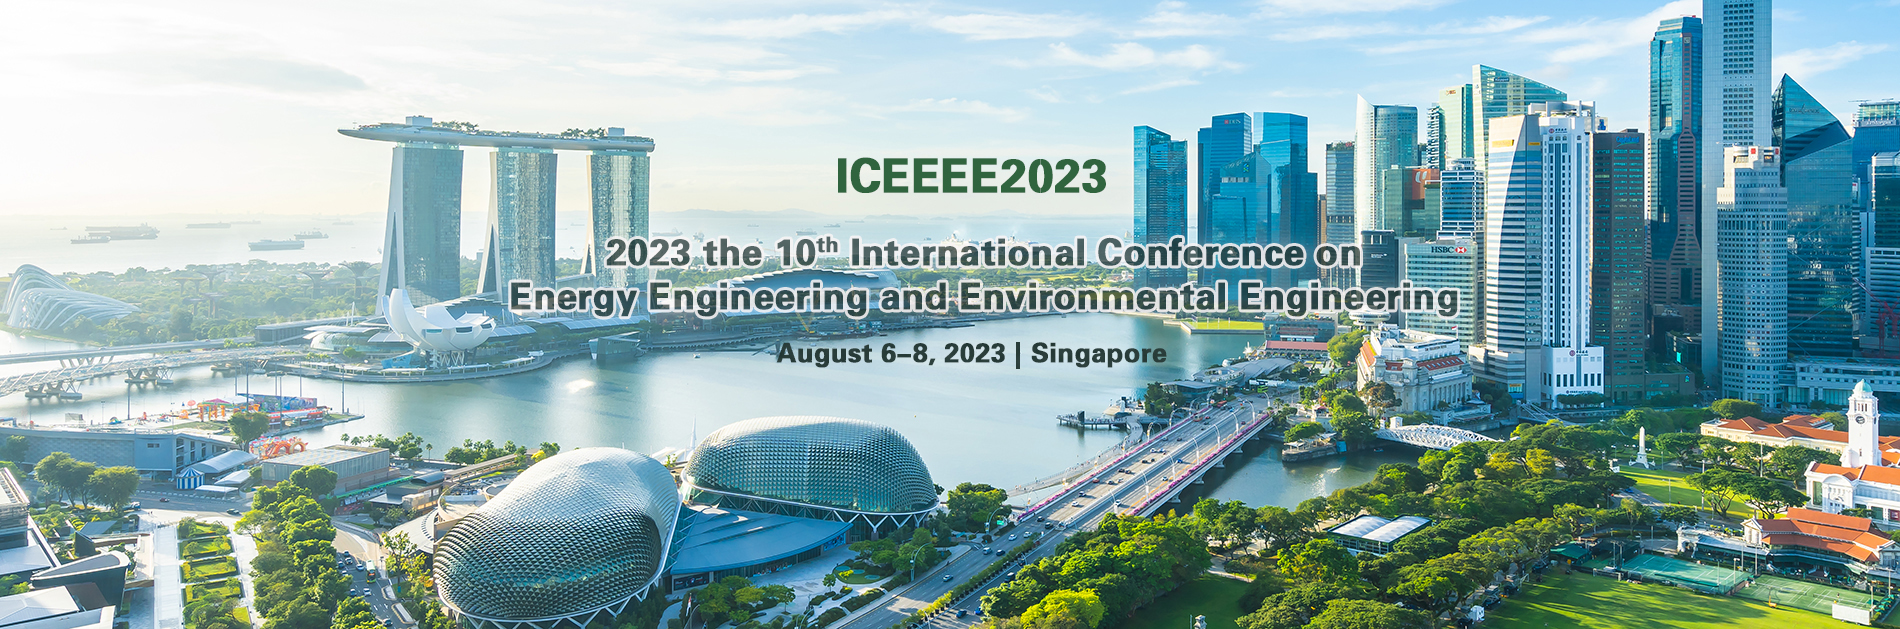 2023 the 10th International Conference on Energy Engineering and Environmental Engineering (ICEEEE2023), Singapore